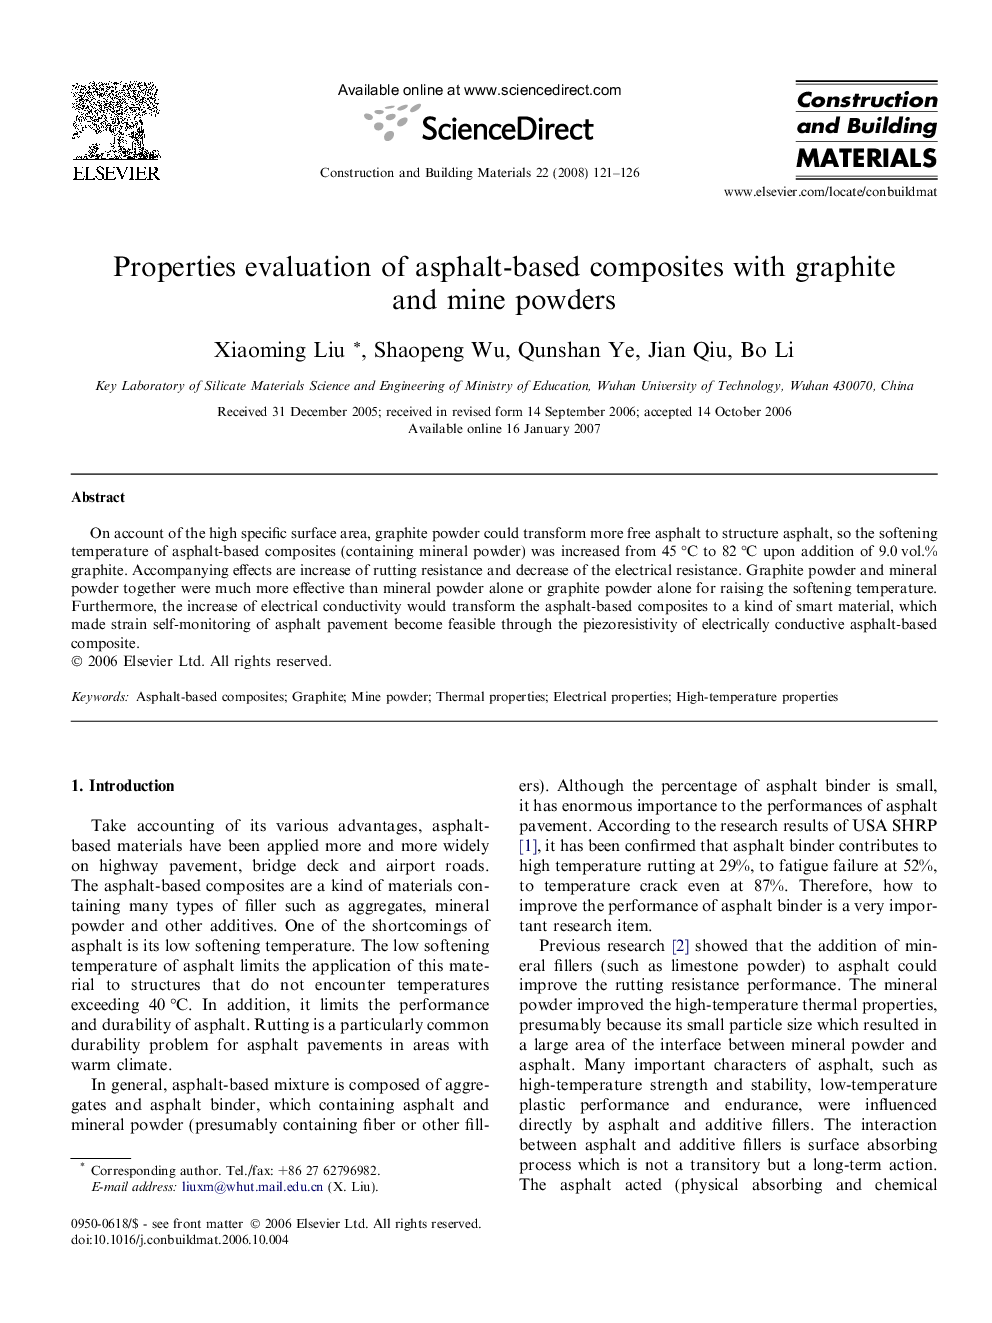 Properties evaluation of asphalt-based composites with graphite and mine powders